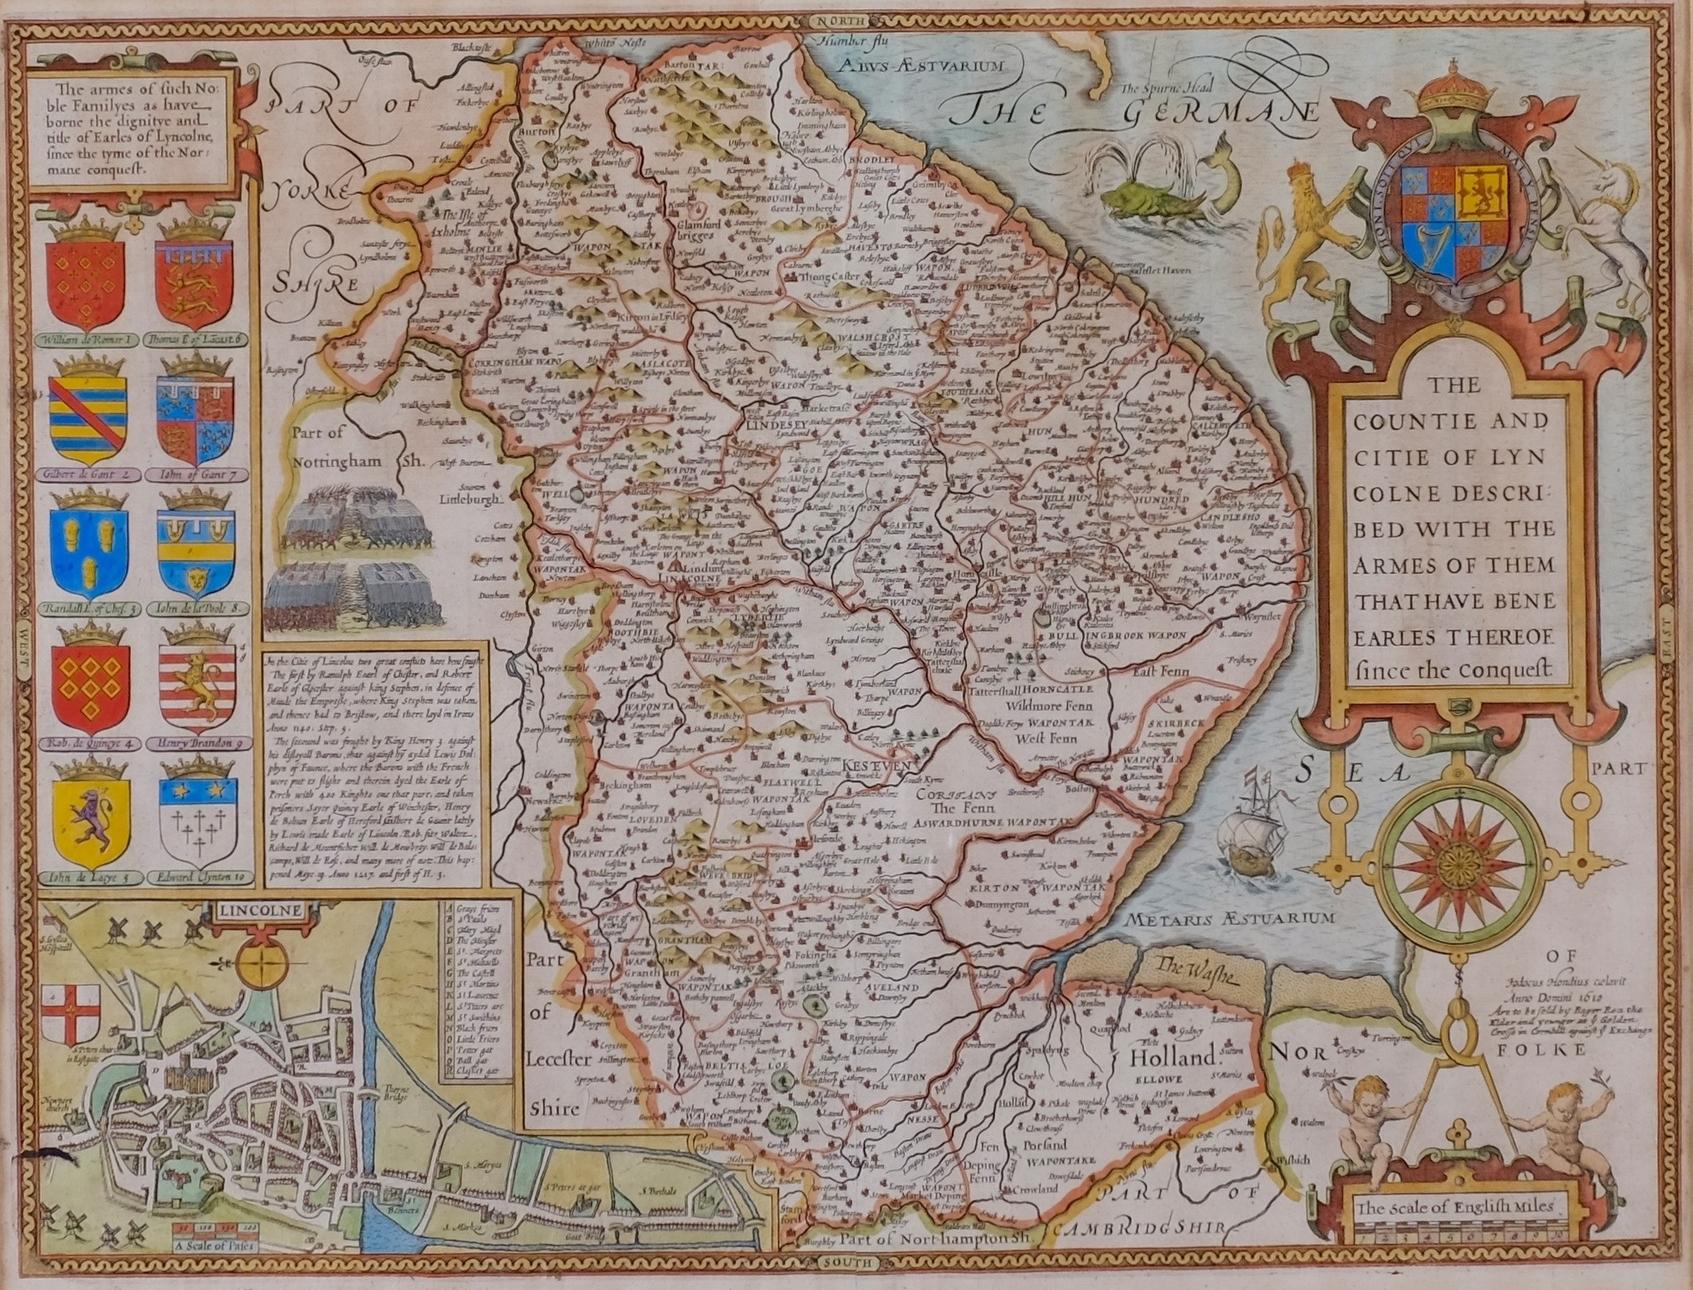 Antique Map of Lincoln 

65 x 72cm 

A beautifully colourful antique map showing the Heraldic Arms for those 'noble families that have borne the dignitiye and title of Earles of Lyncolne since the tyme of the Normane conquest'.

'The Countie and